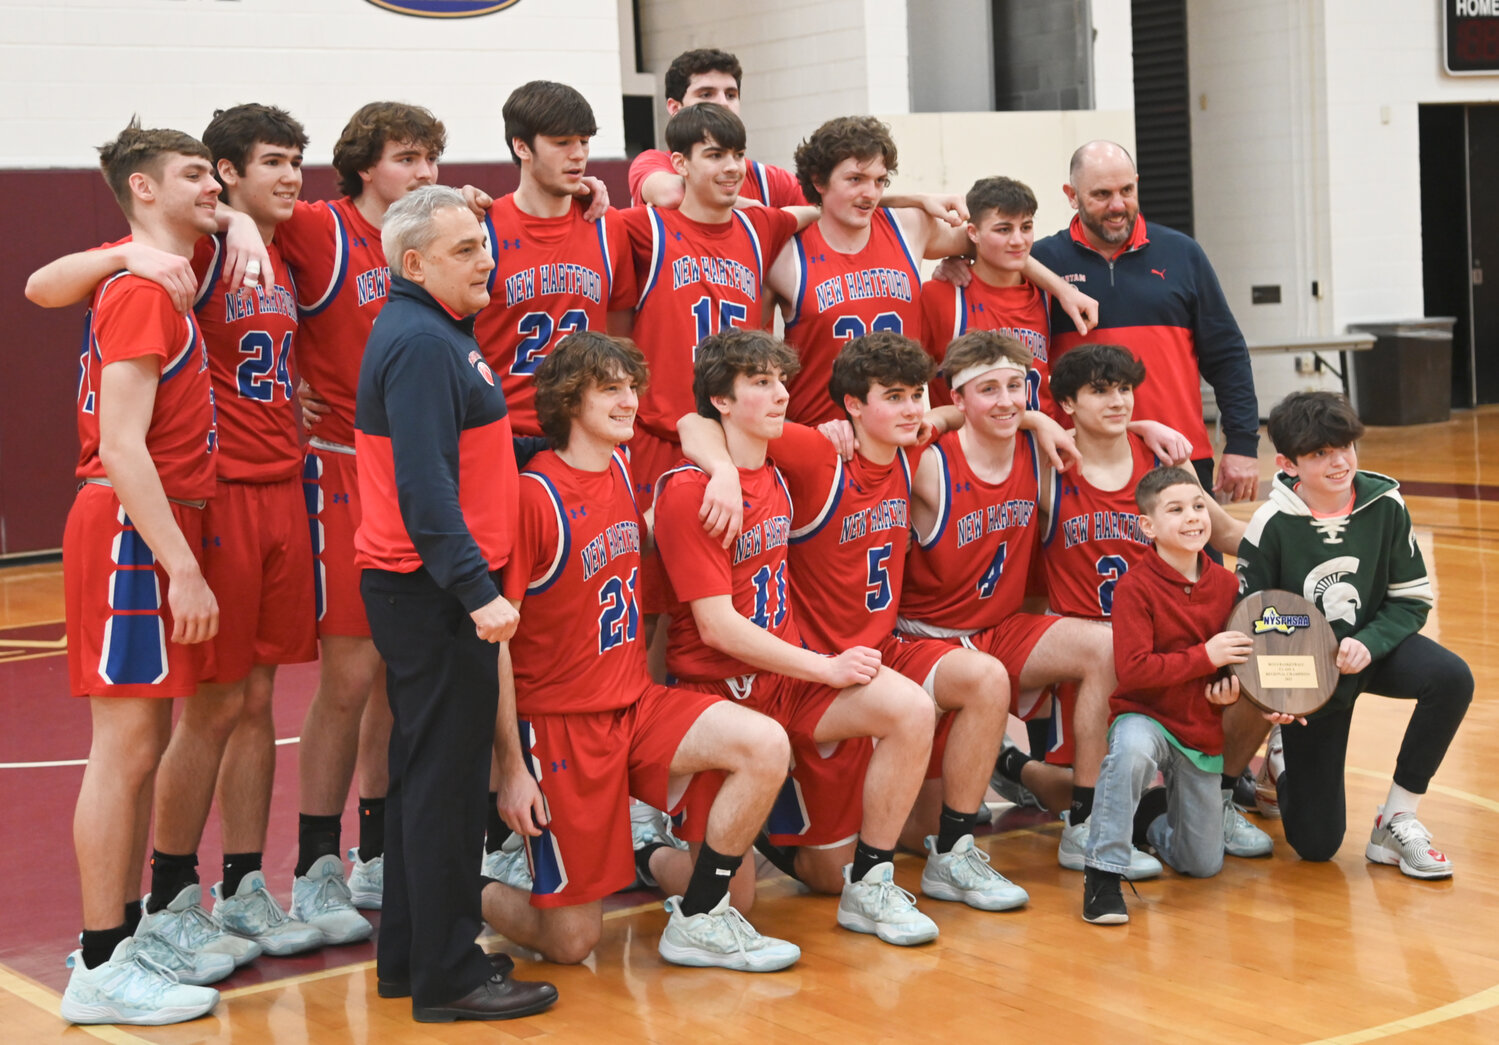 The New Hartford boys basketball team celebrates after claiming the Class A regional final title on Saturday at SUNY Potsdam.